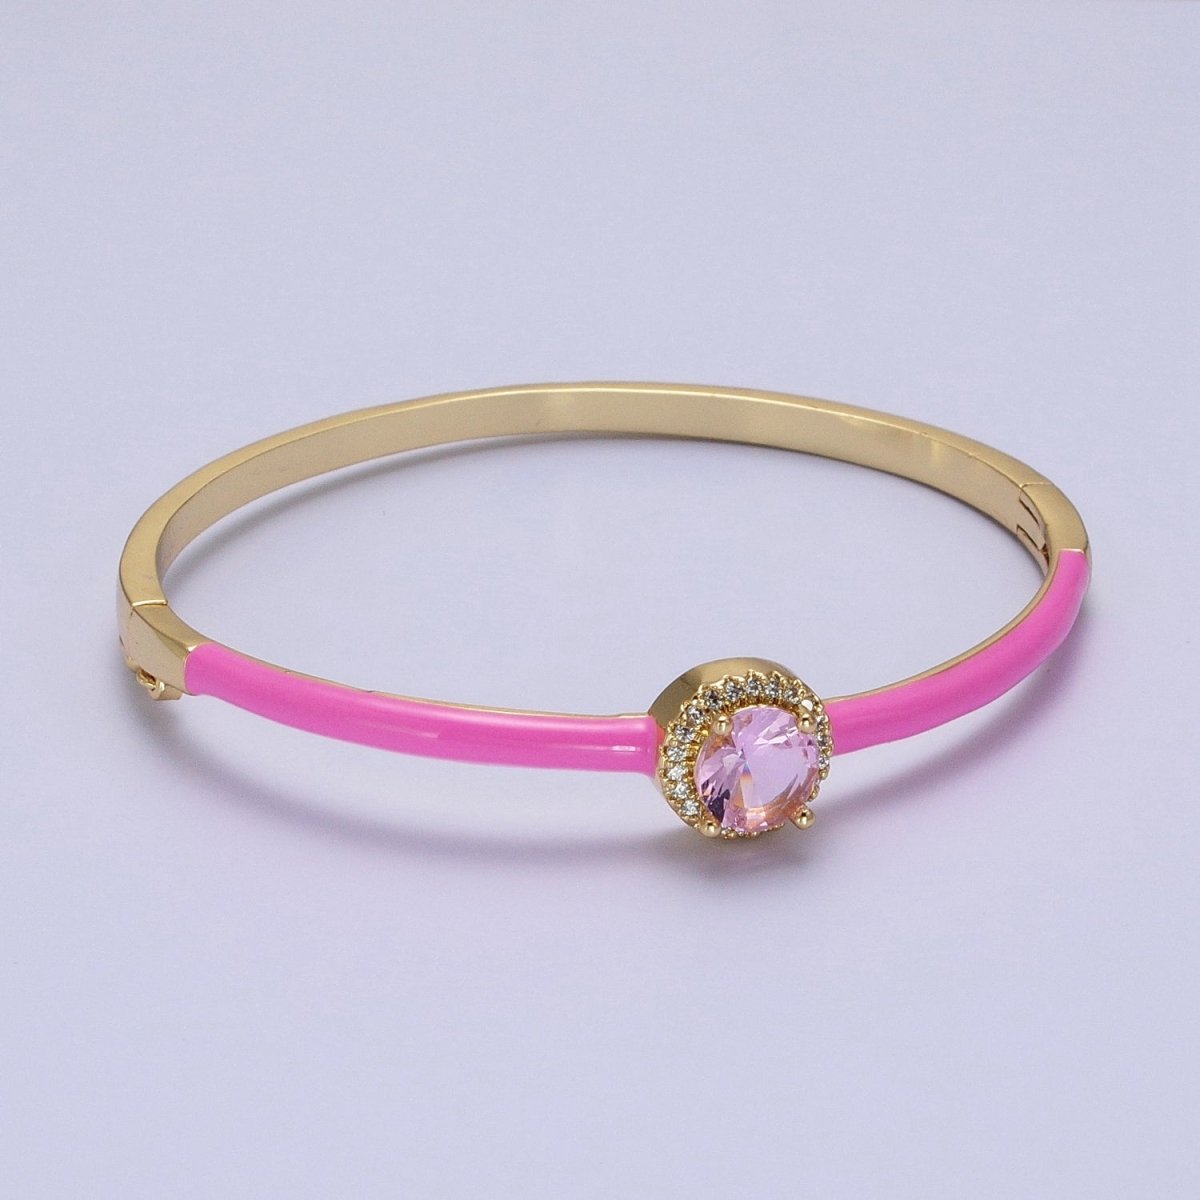 Barbie core Gold Filled Round White, Green, Pink Micro Paved Enamel Gold Bangle Bracelet | WA-1340 - WA-1342 Clearance Pricing - DLUXCA